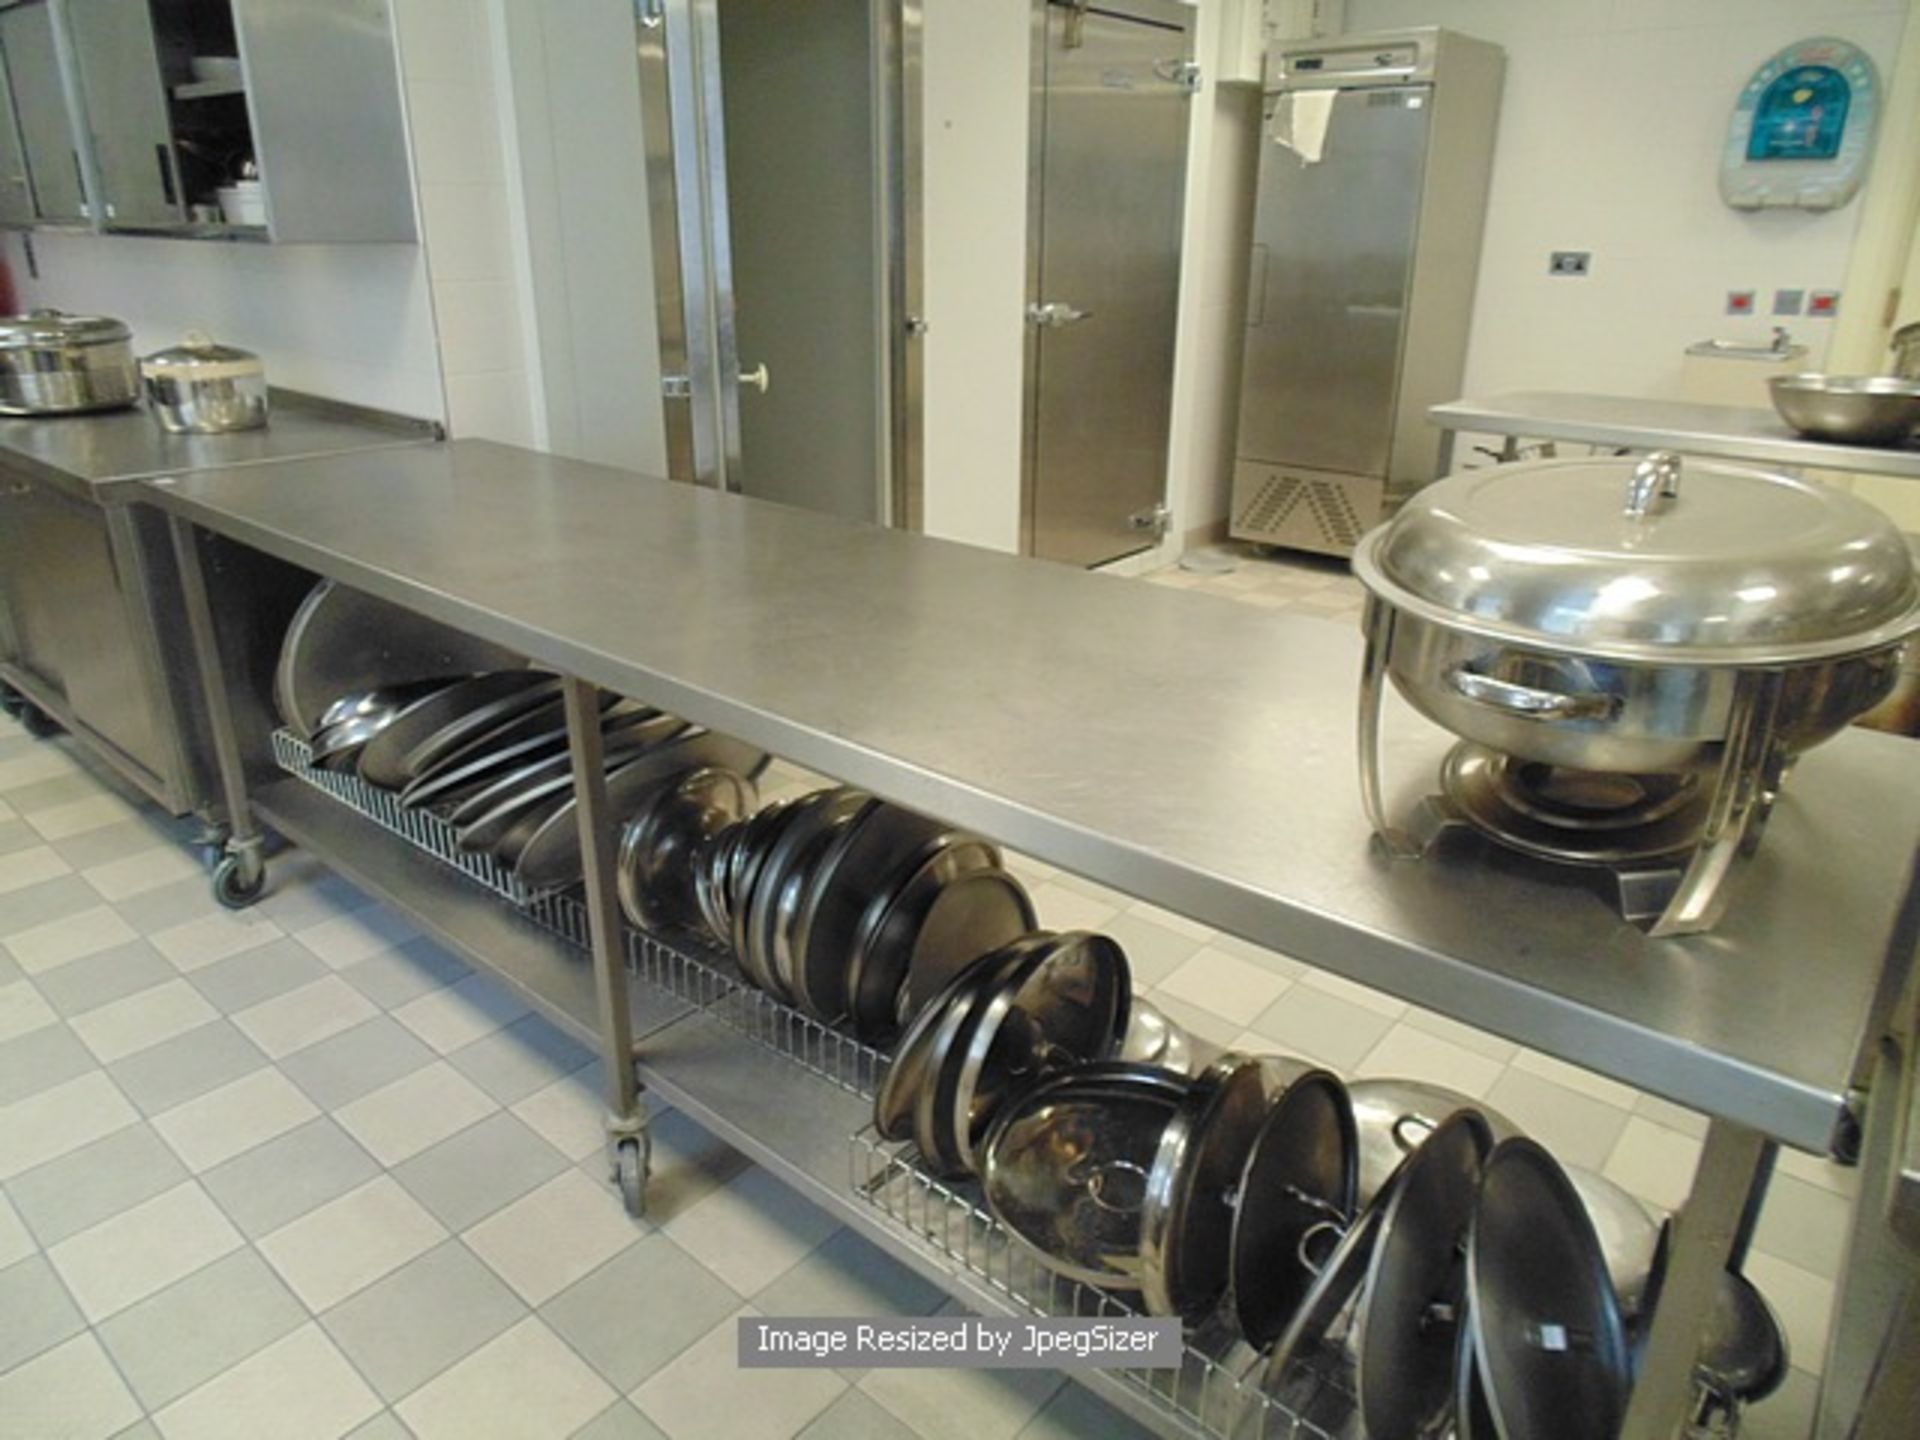 Moffat stainless steel mobile preparation table with under shelf 2700mm x 690mm x 900mm  Lift out